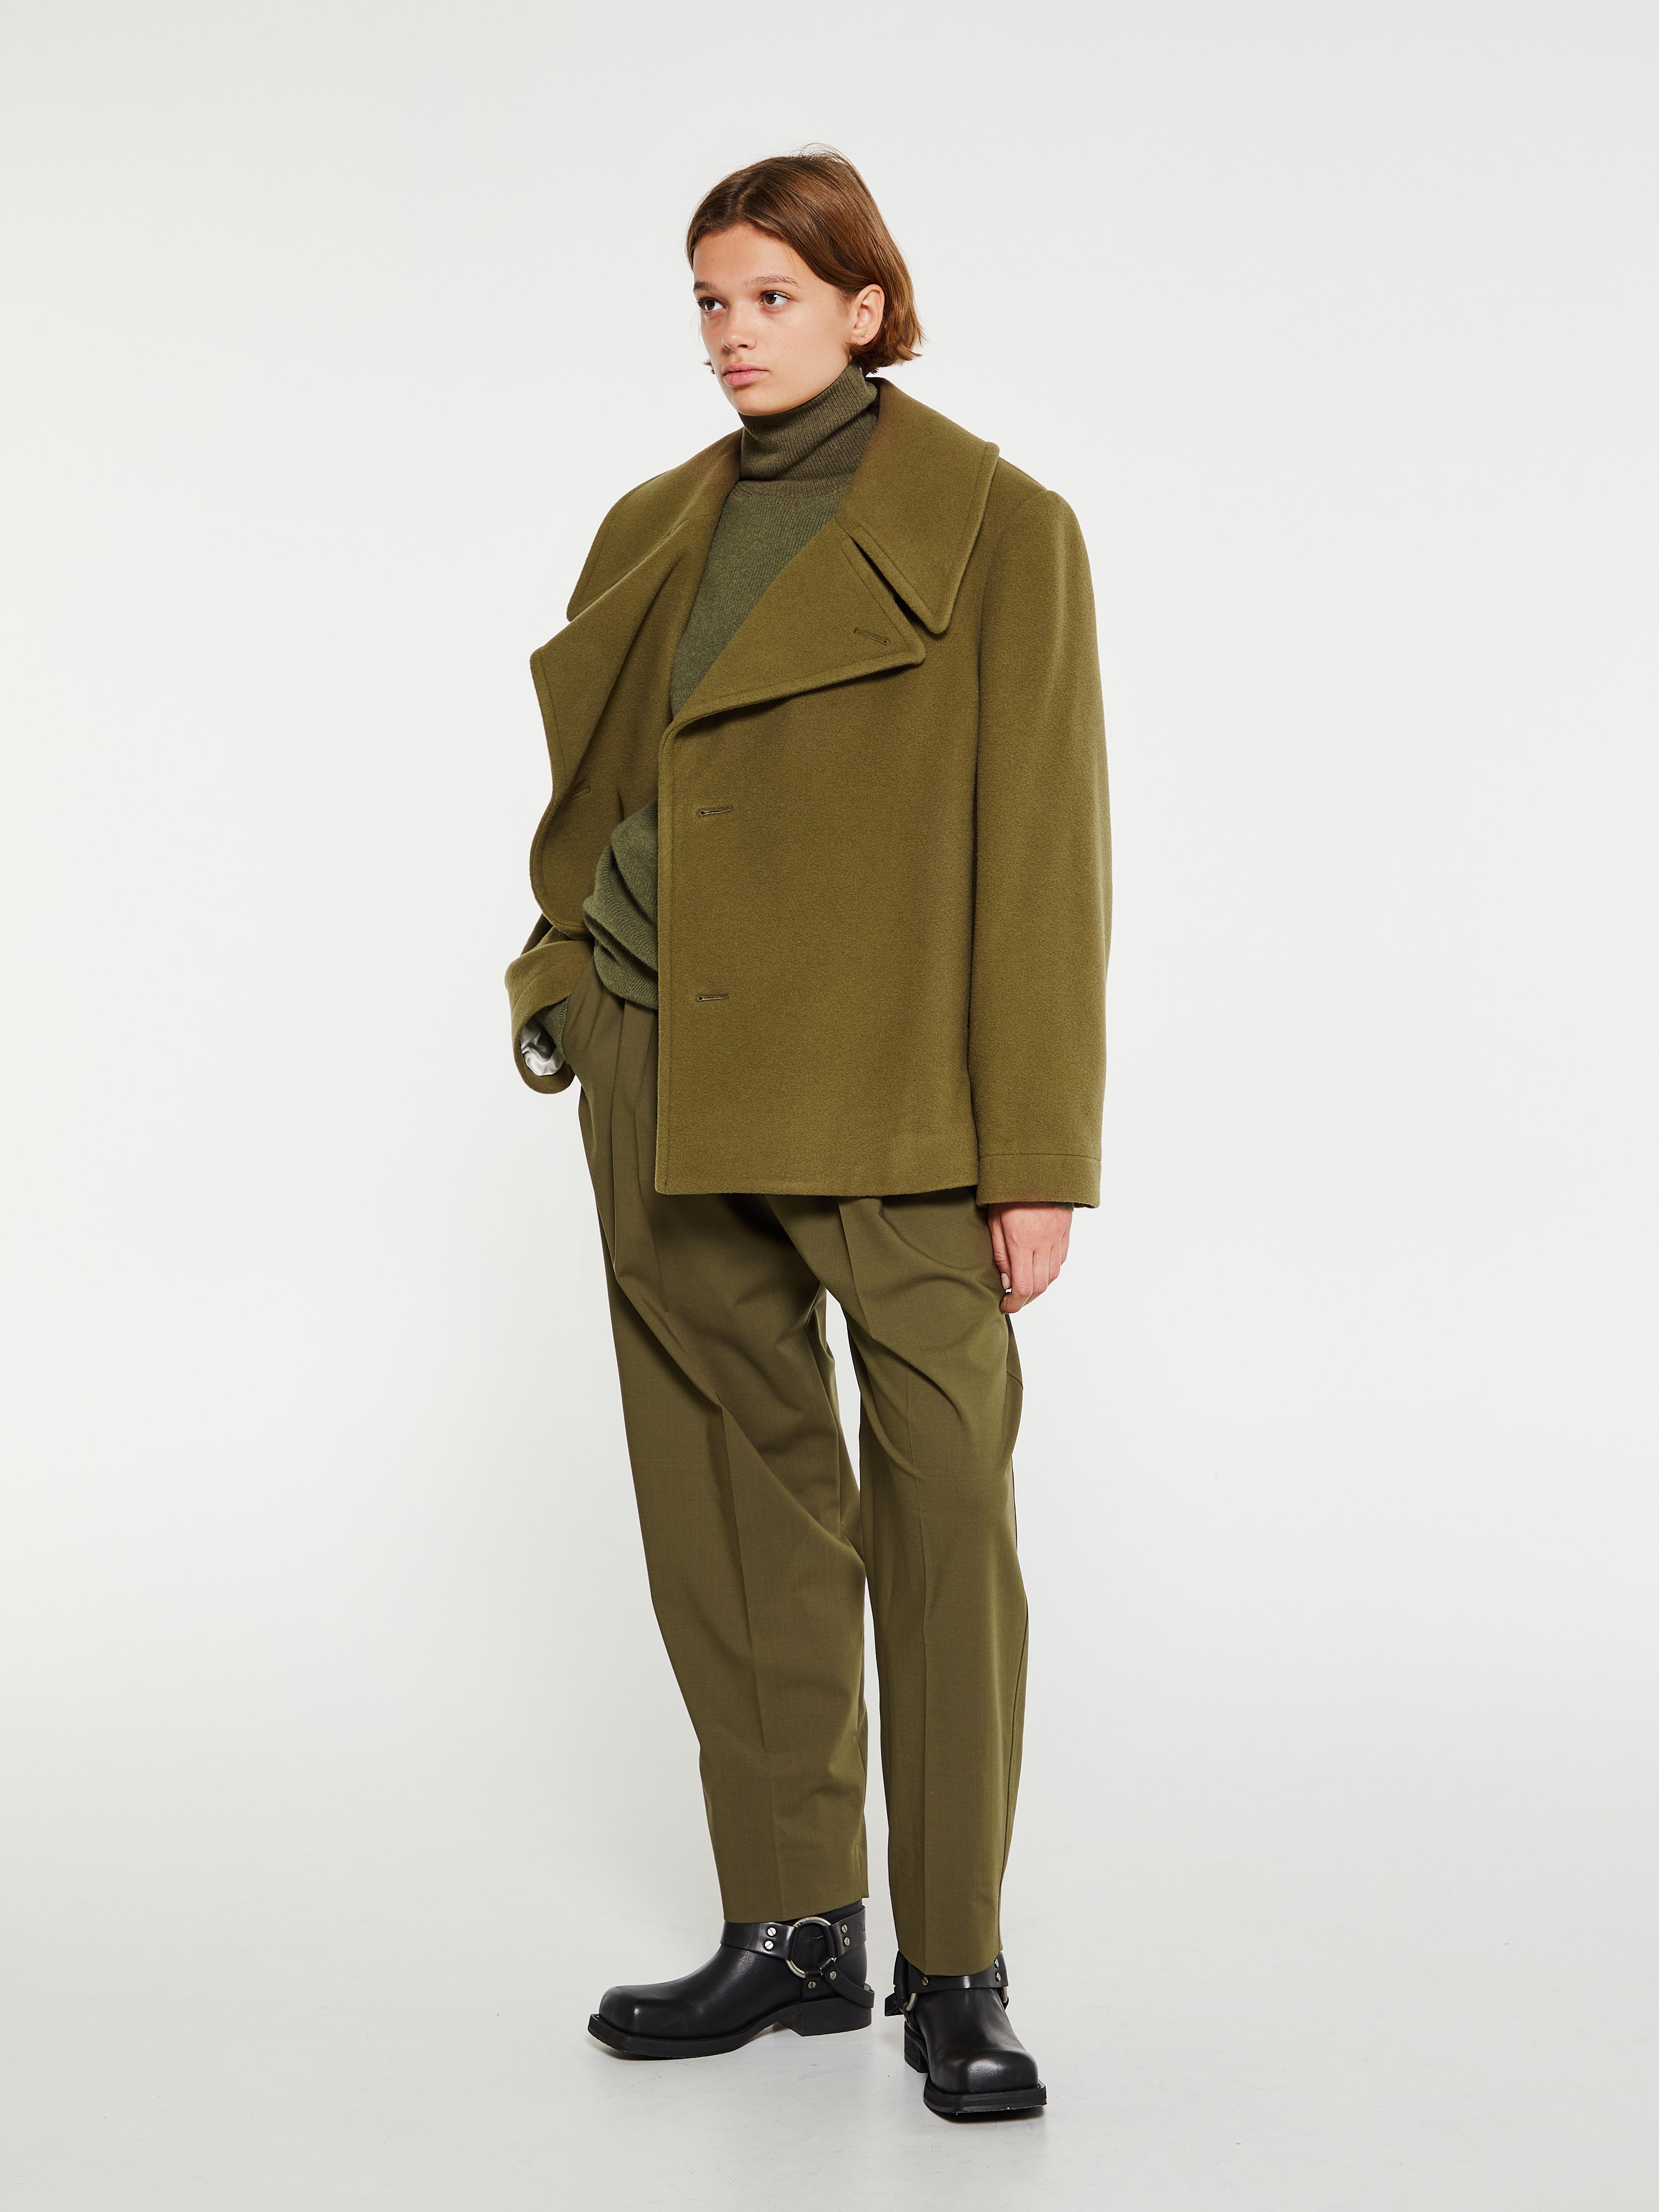 Short Caban Jacket in Capers Khaki